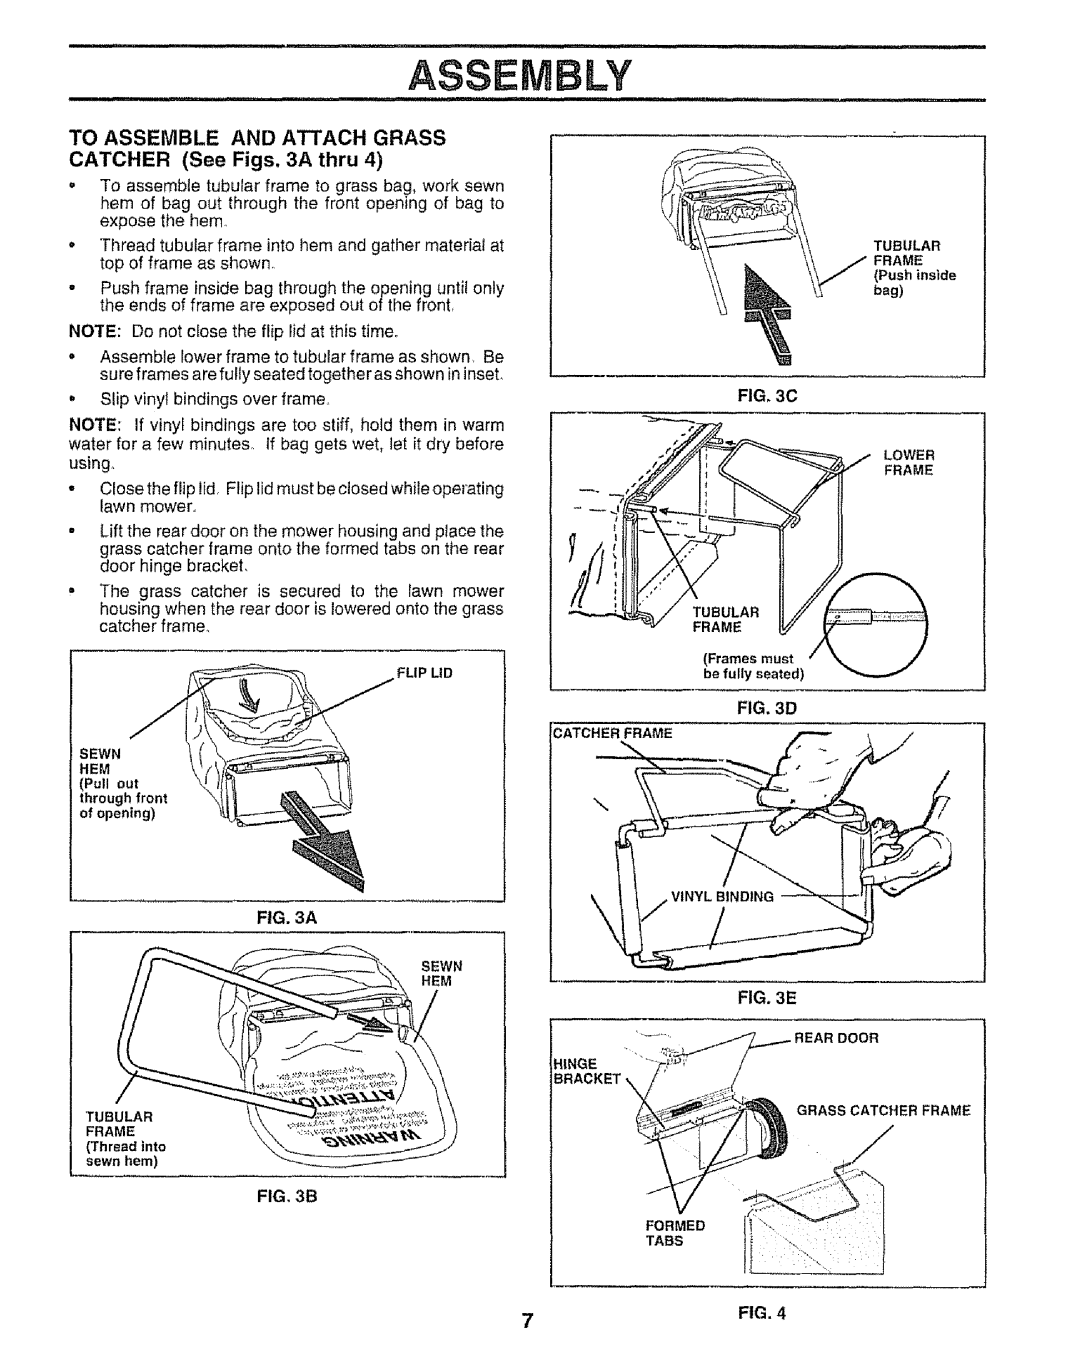 Craftsman 917.373841 owner manual To Assemble And Attach Grass, CATCHER See Figs. 3A thru, FIG, 3C 